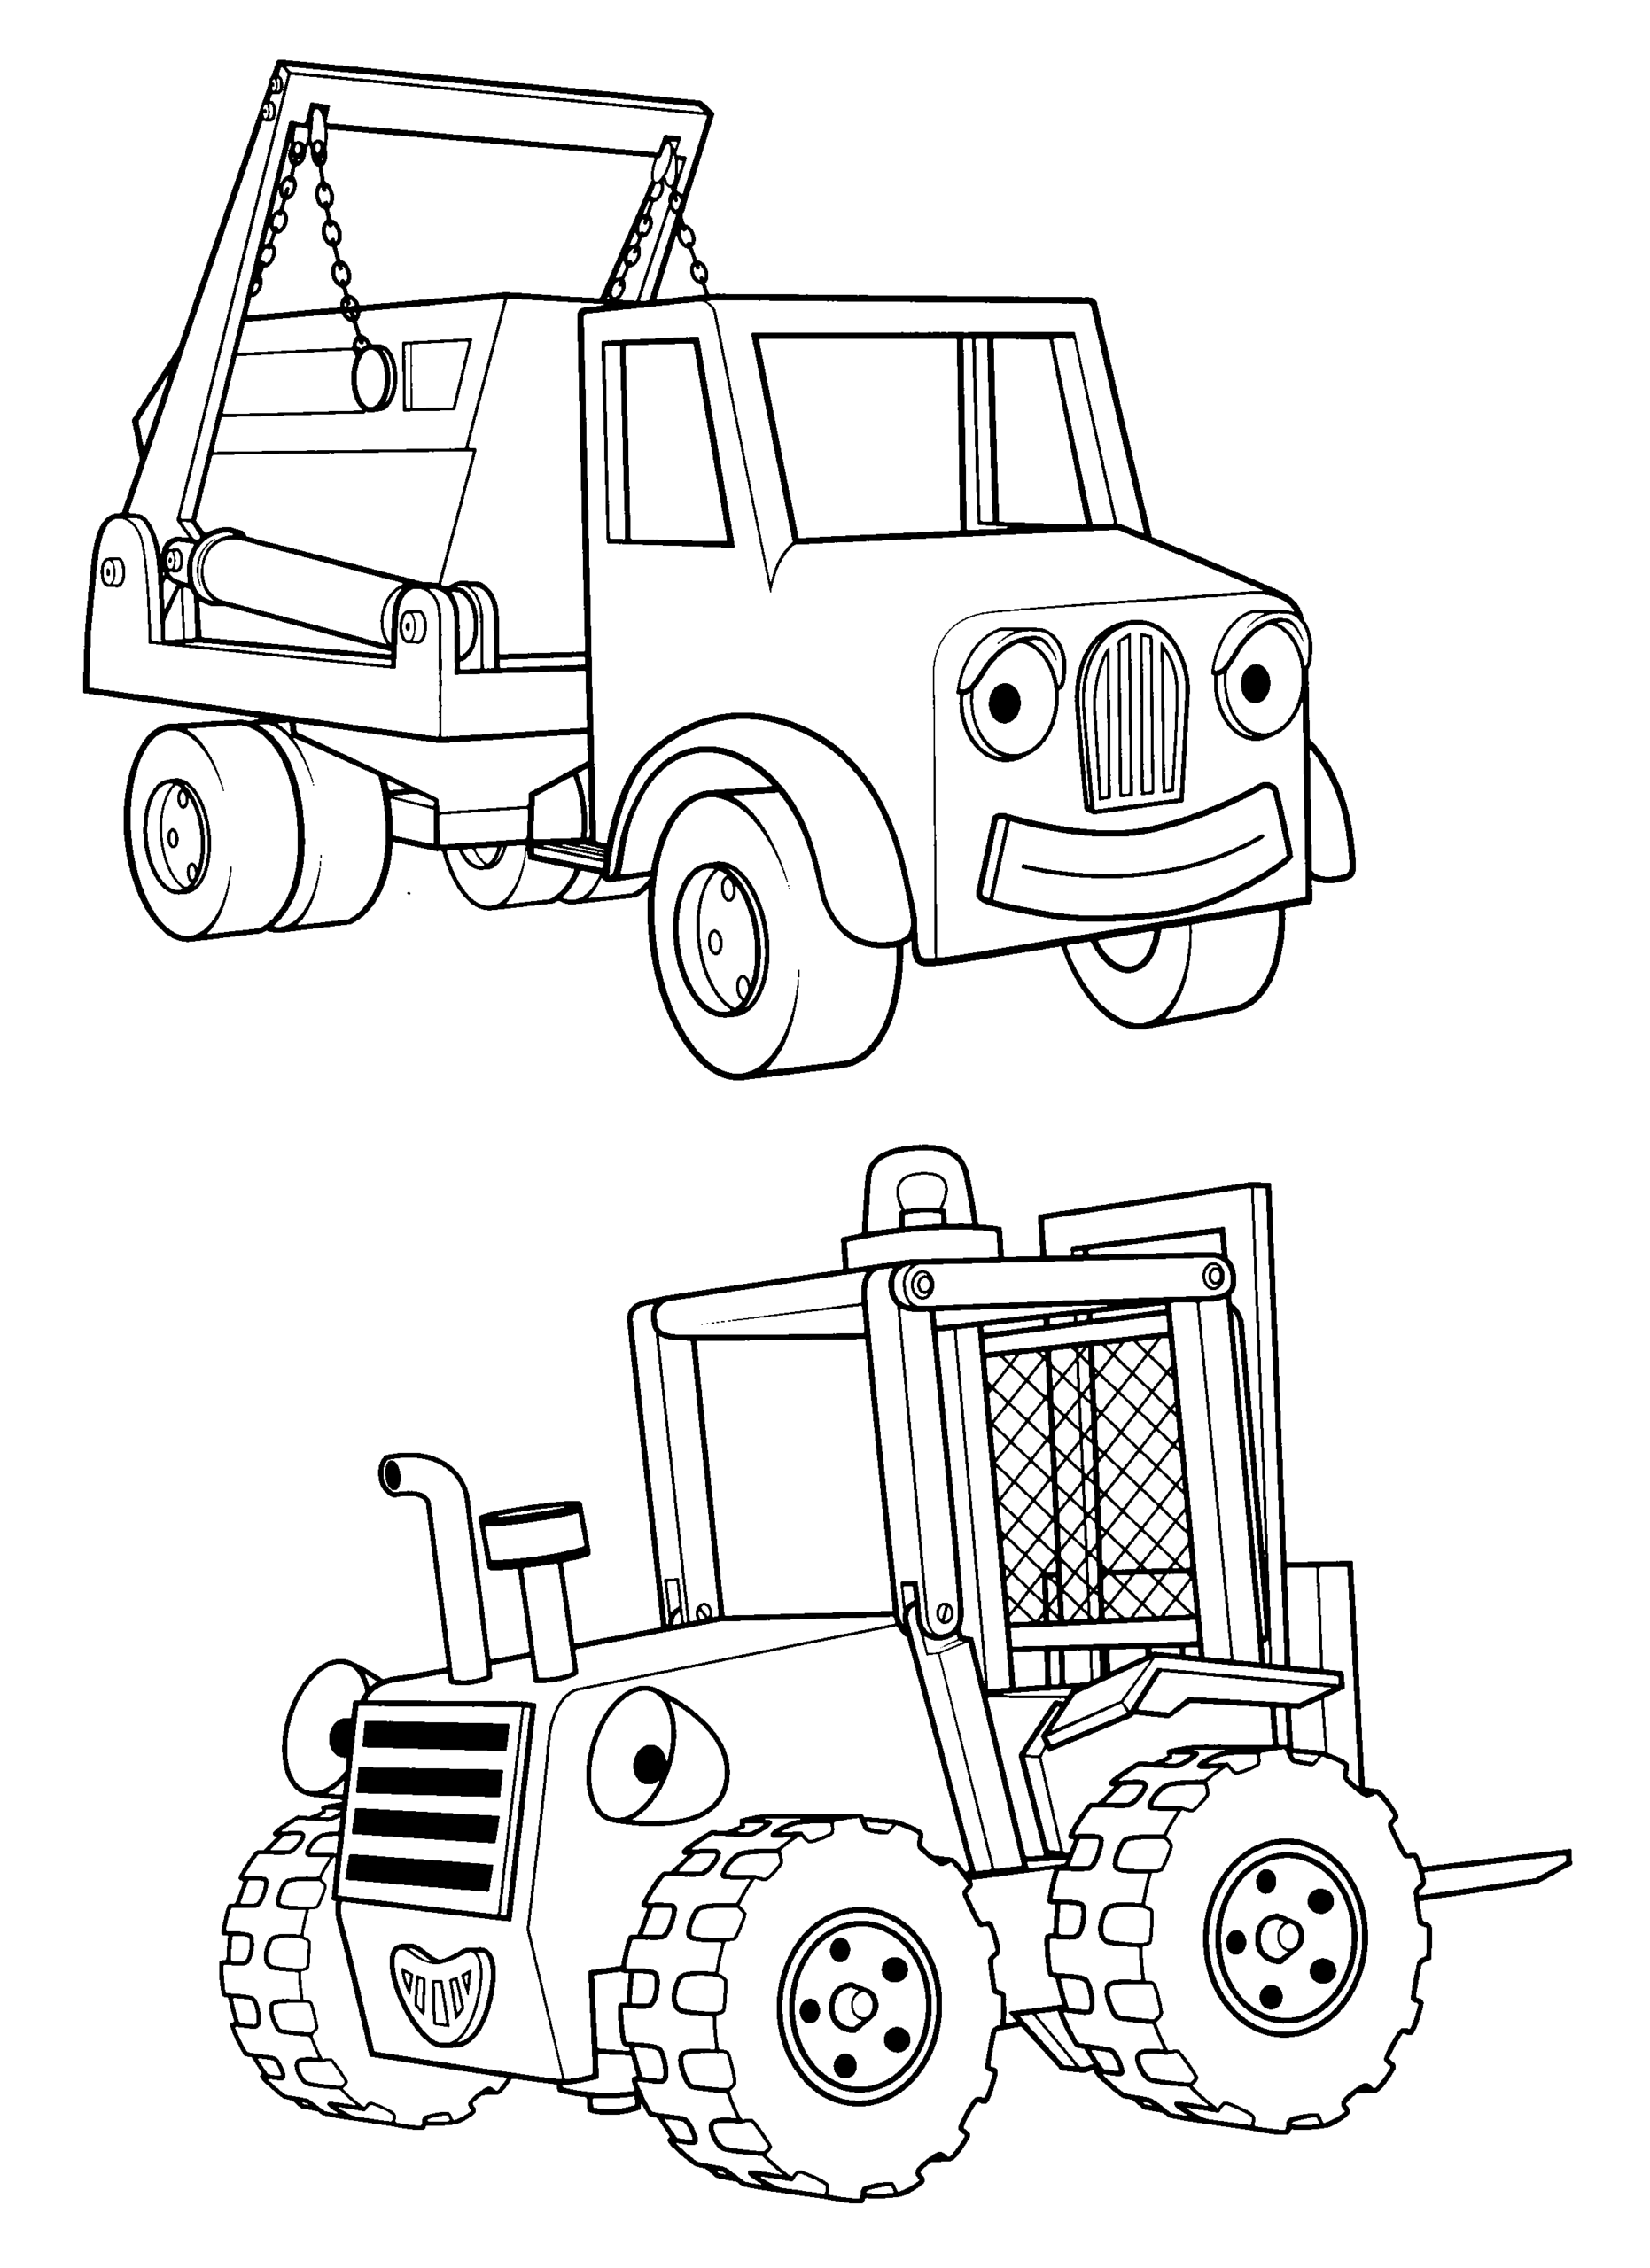 Bob the Builder Coloring Pages TV Film bob the builder 8 Printable 2020 01102 Coloring4free